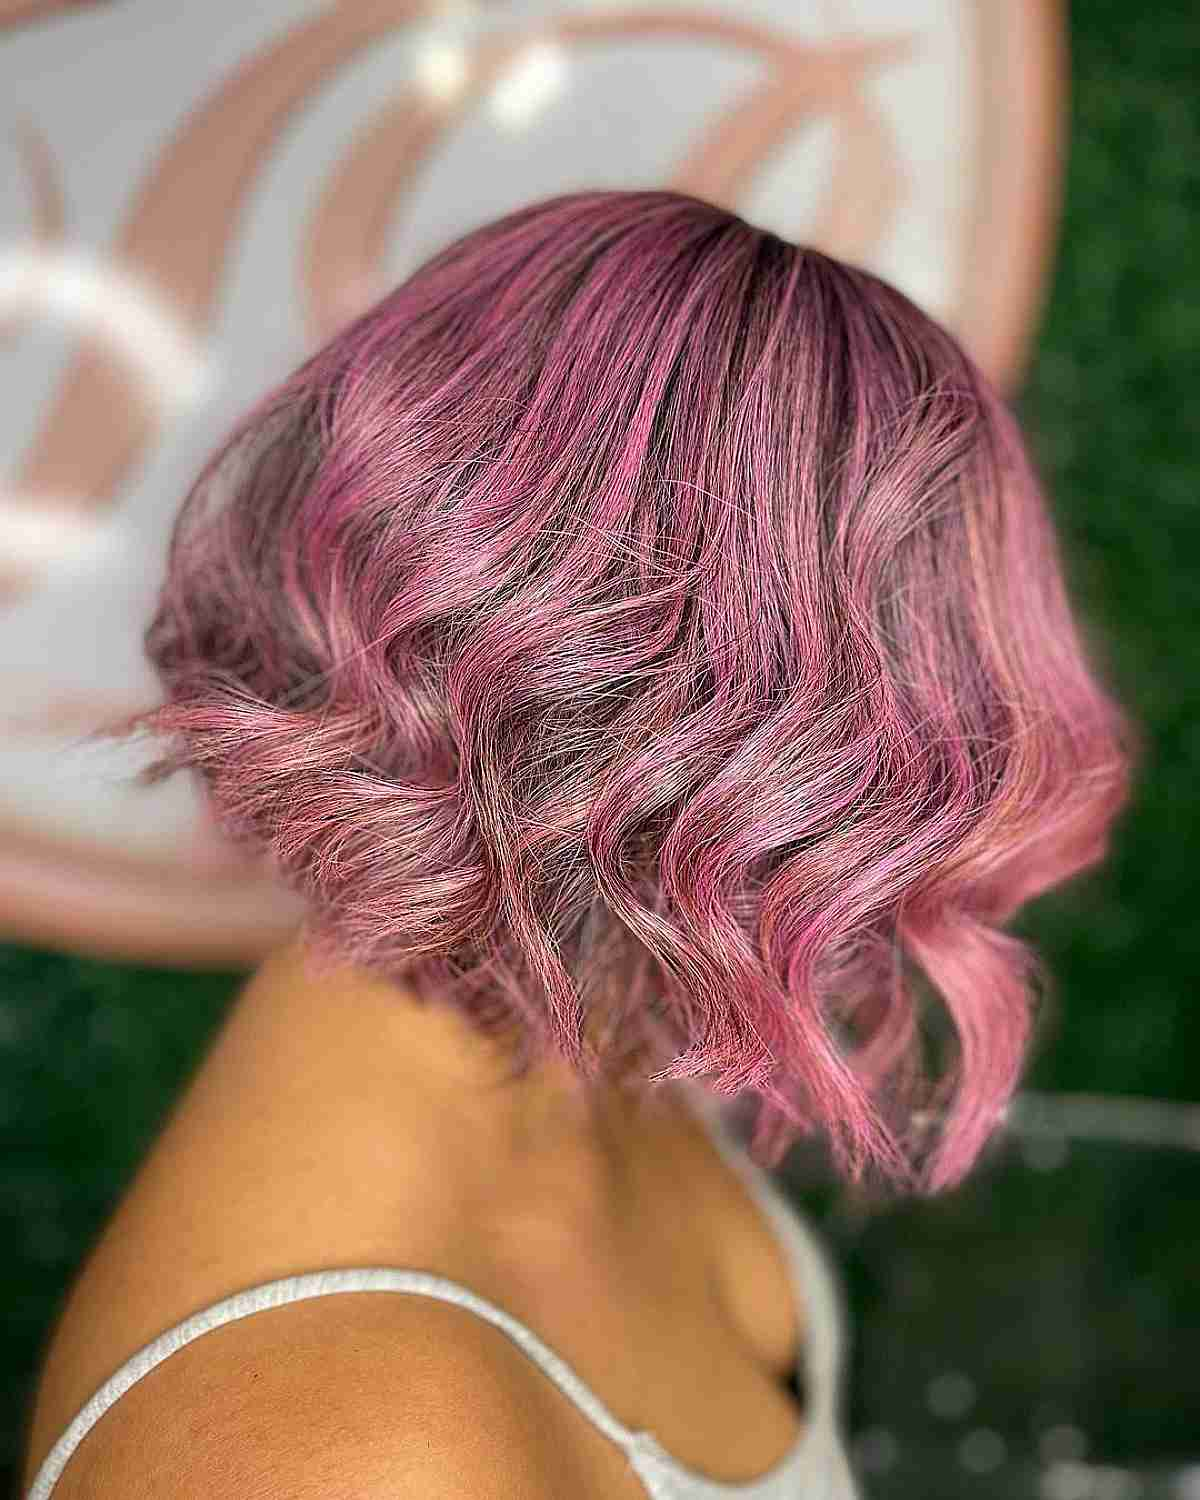 Rich Pink Highlights on Short-Lengthed Hair